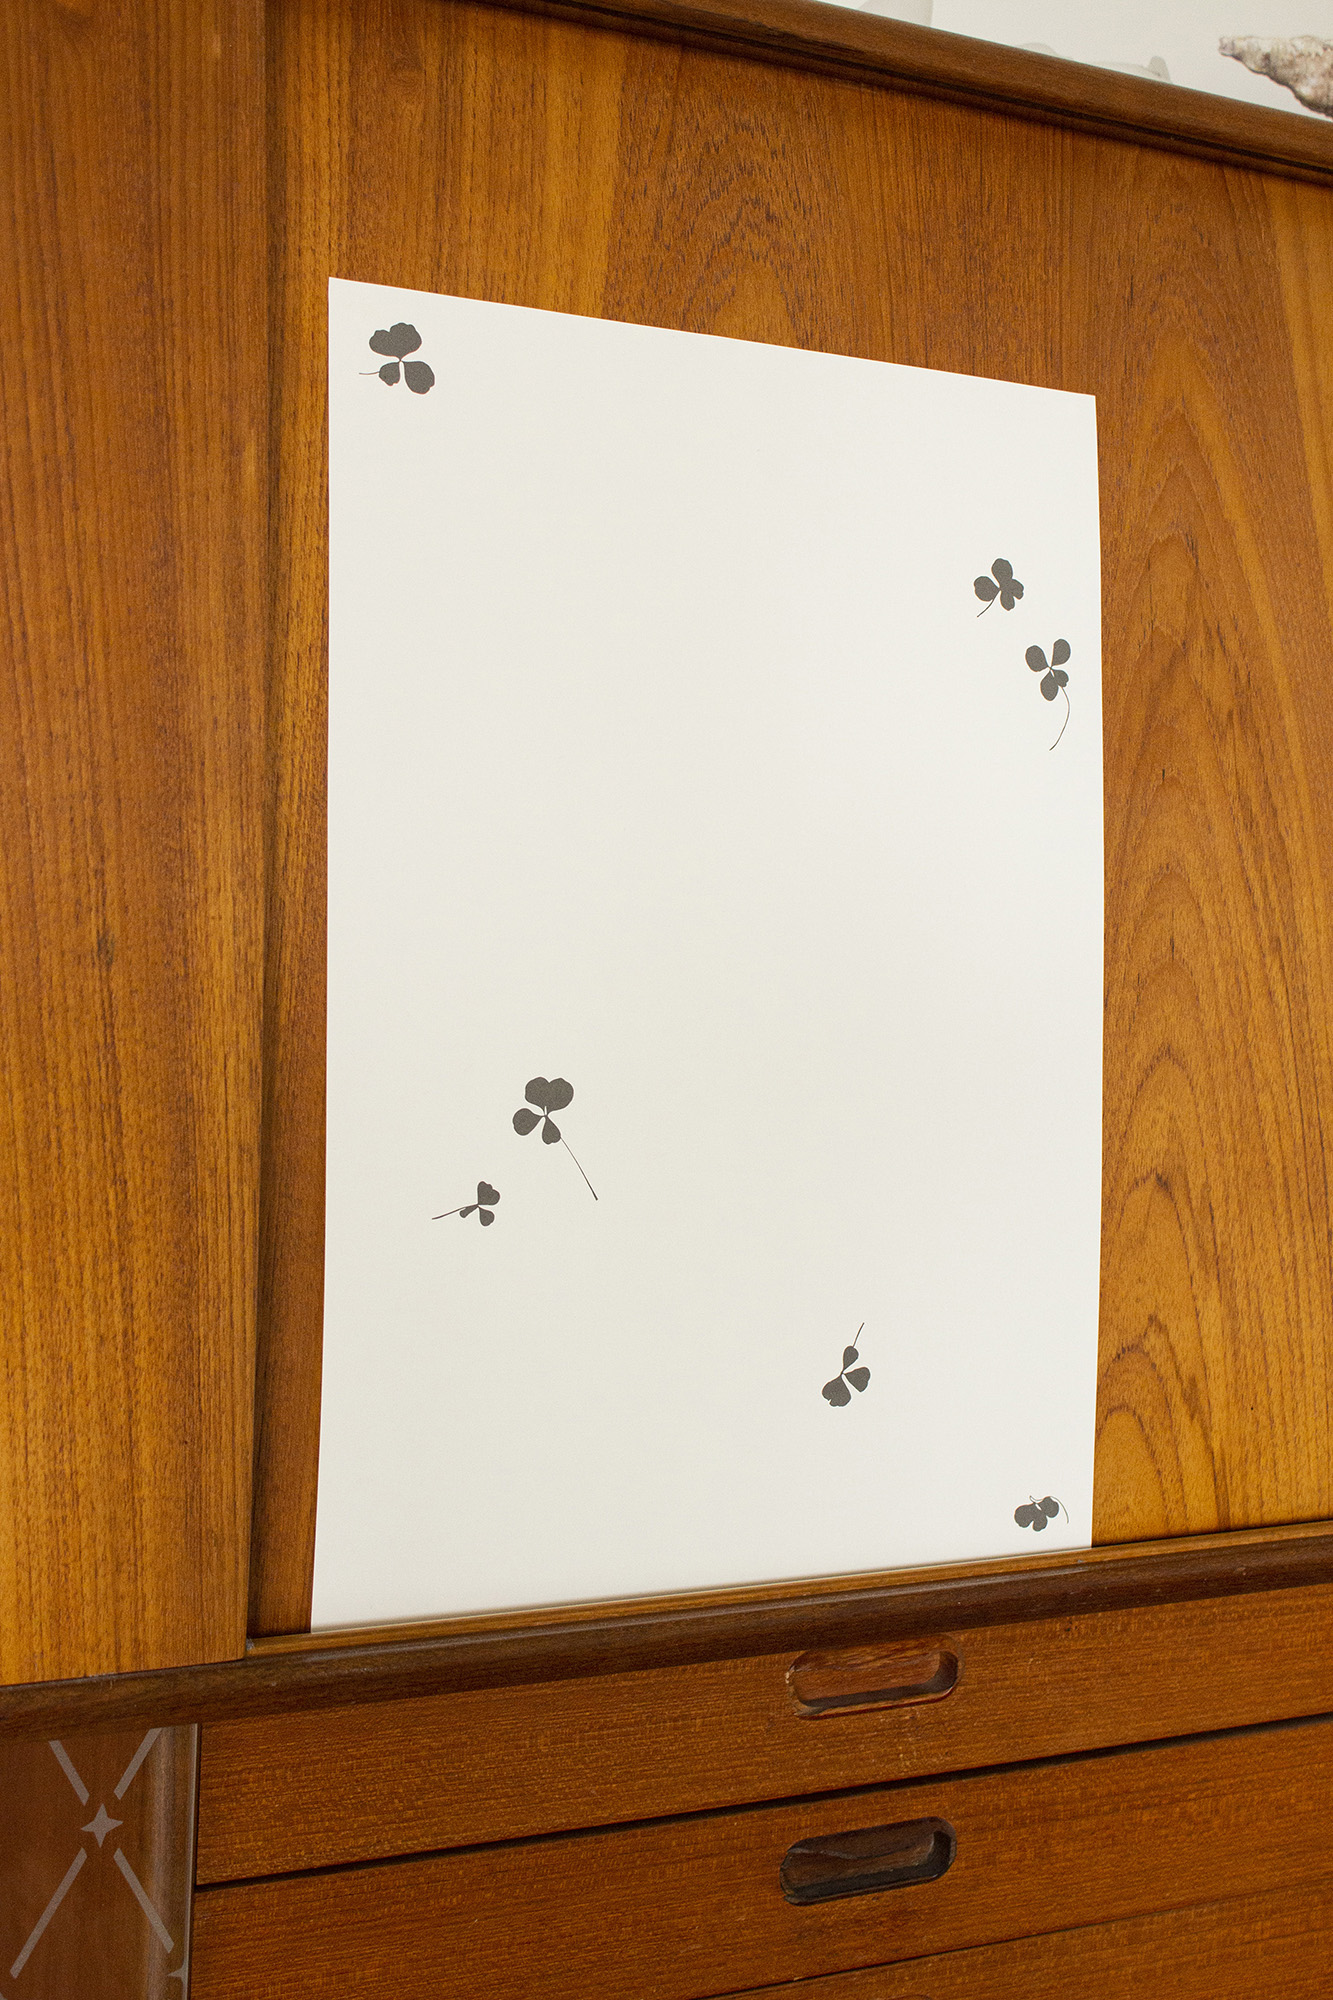 A piece of paper, speckled with dispersed four leaf clovers, leans up against the cabinet of a teak dresser.